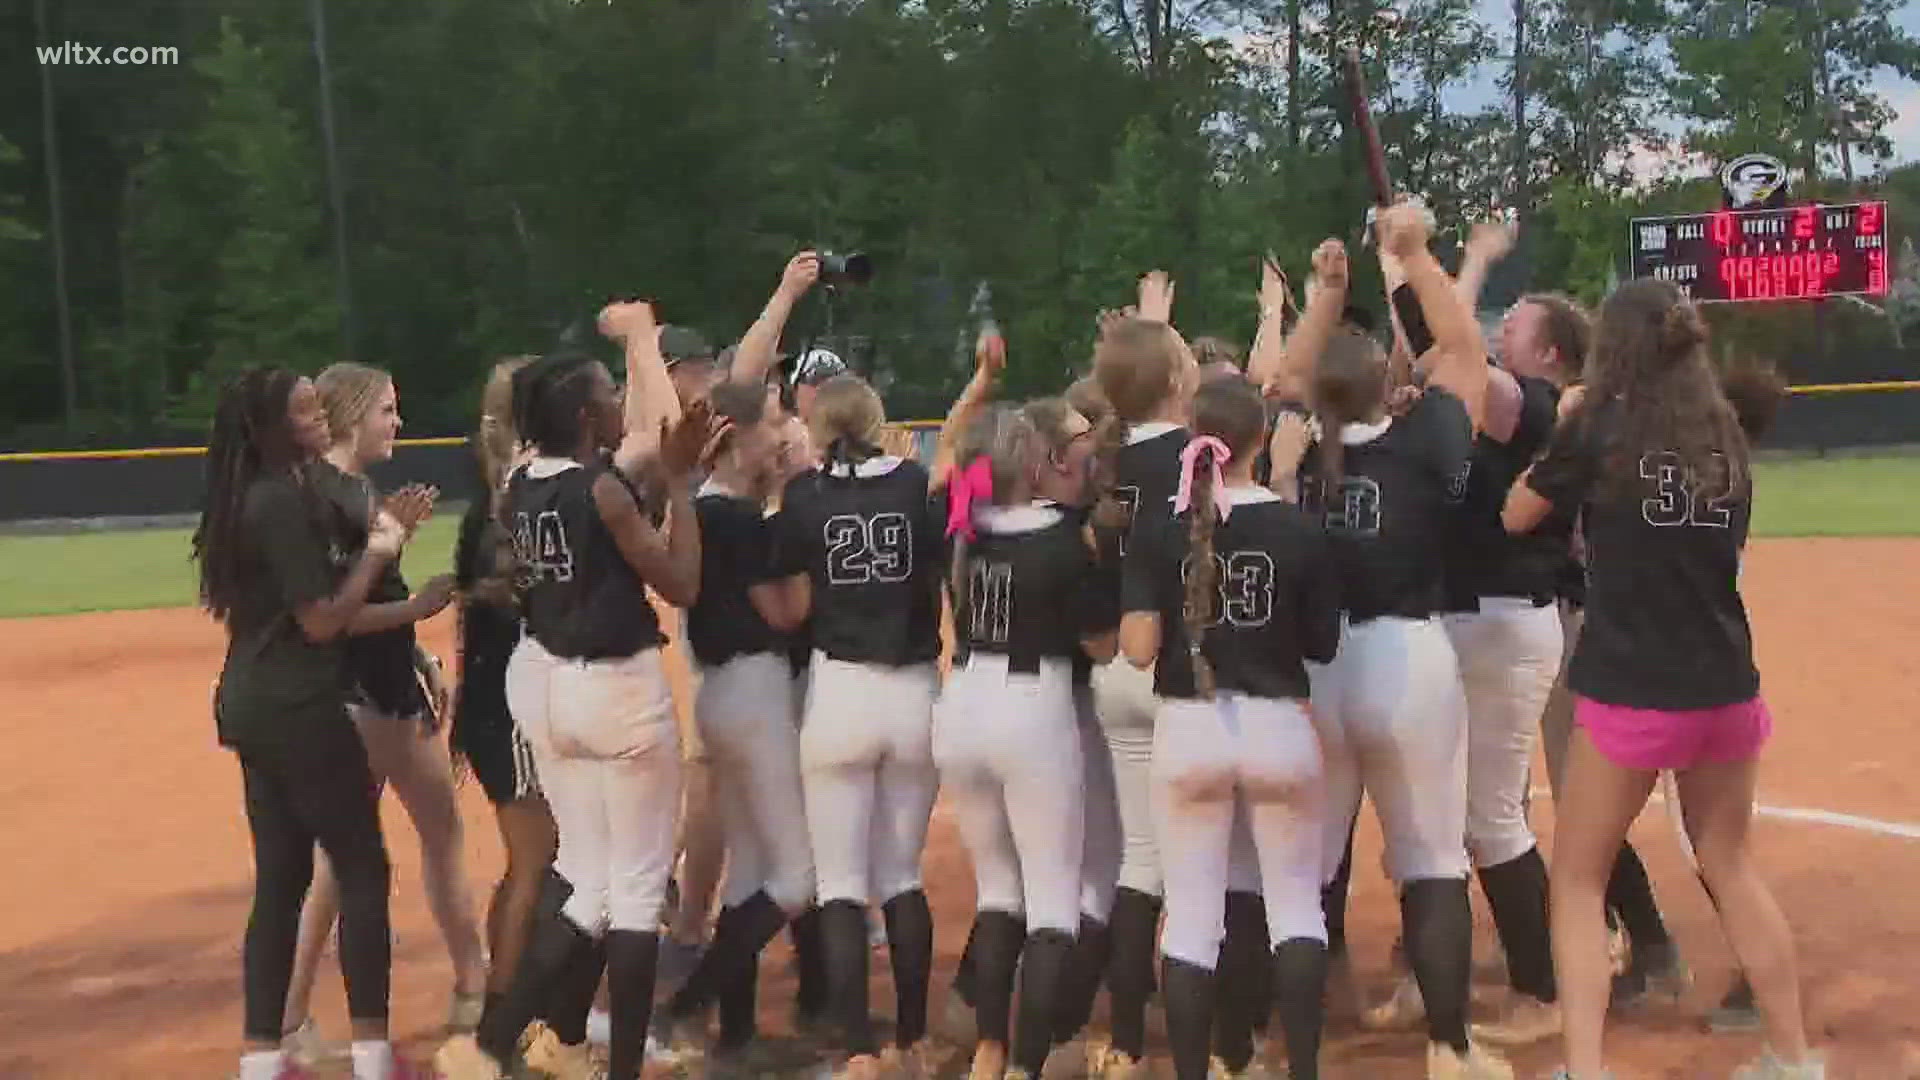 Highlights and reaction from Gray Collegiate Academy's 8-4 win over Marion. Also Mid-Carolina battles Oceanside Collegiate for the 2A baseball crown